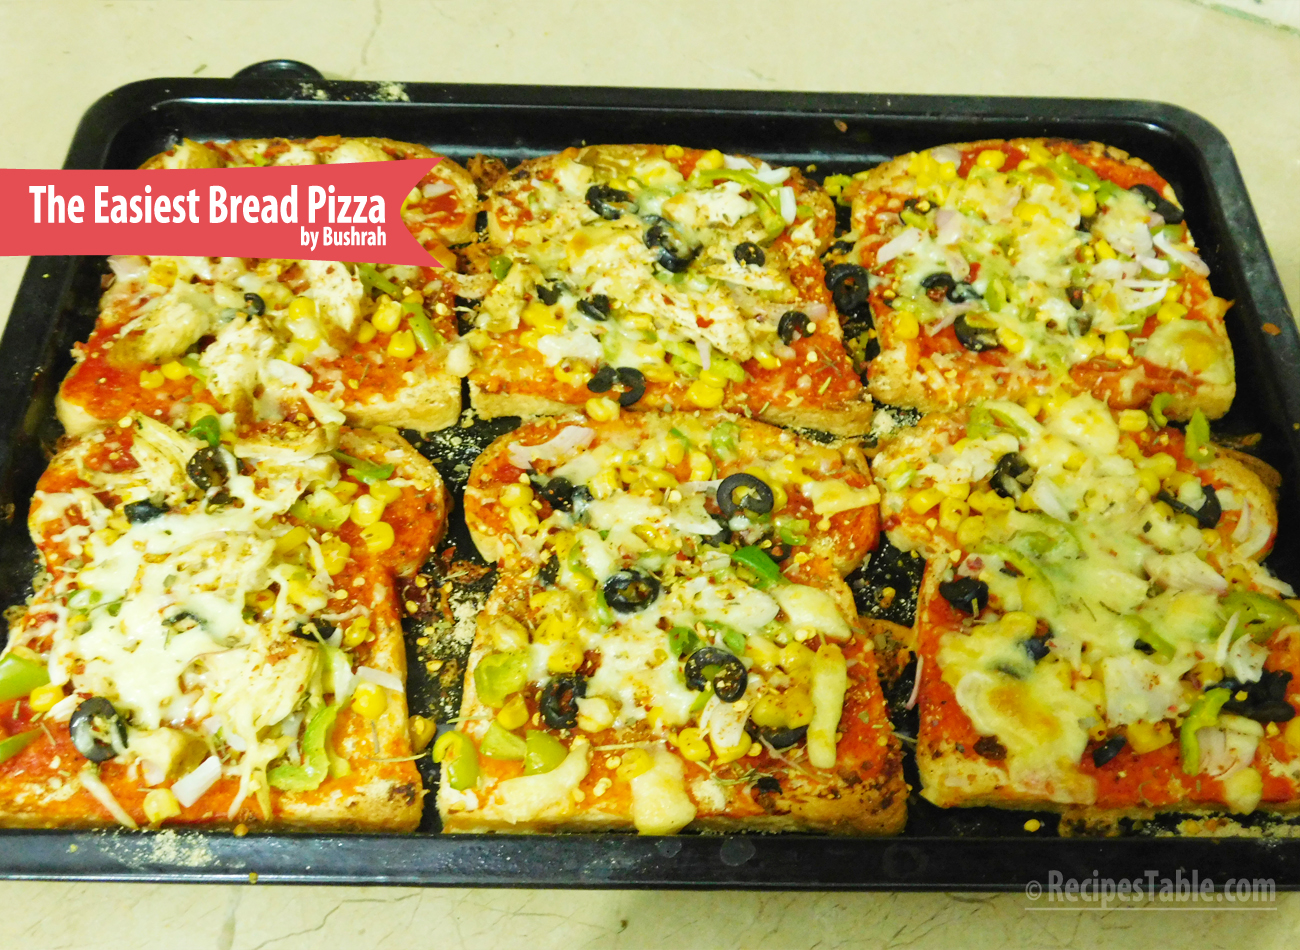 The Easiest Bread Pizza recipe